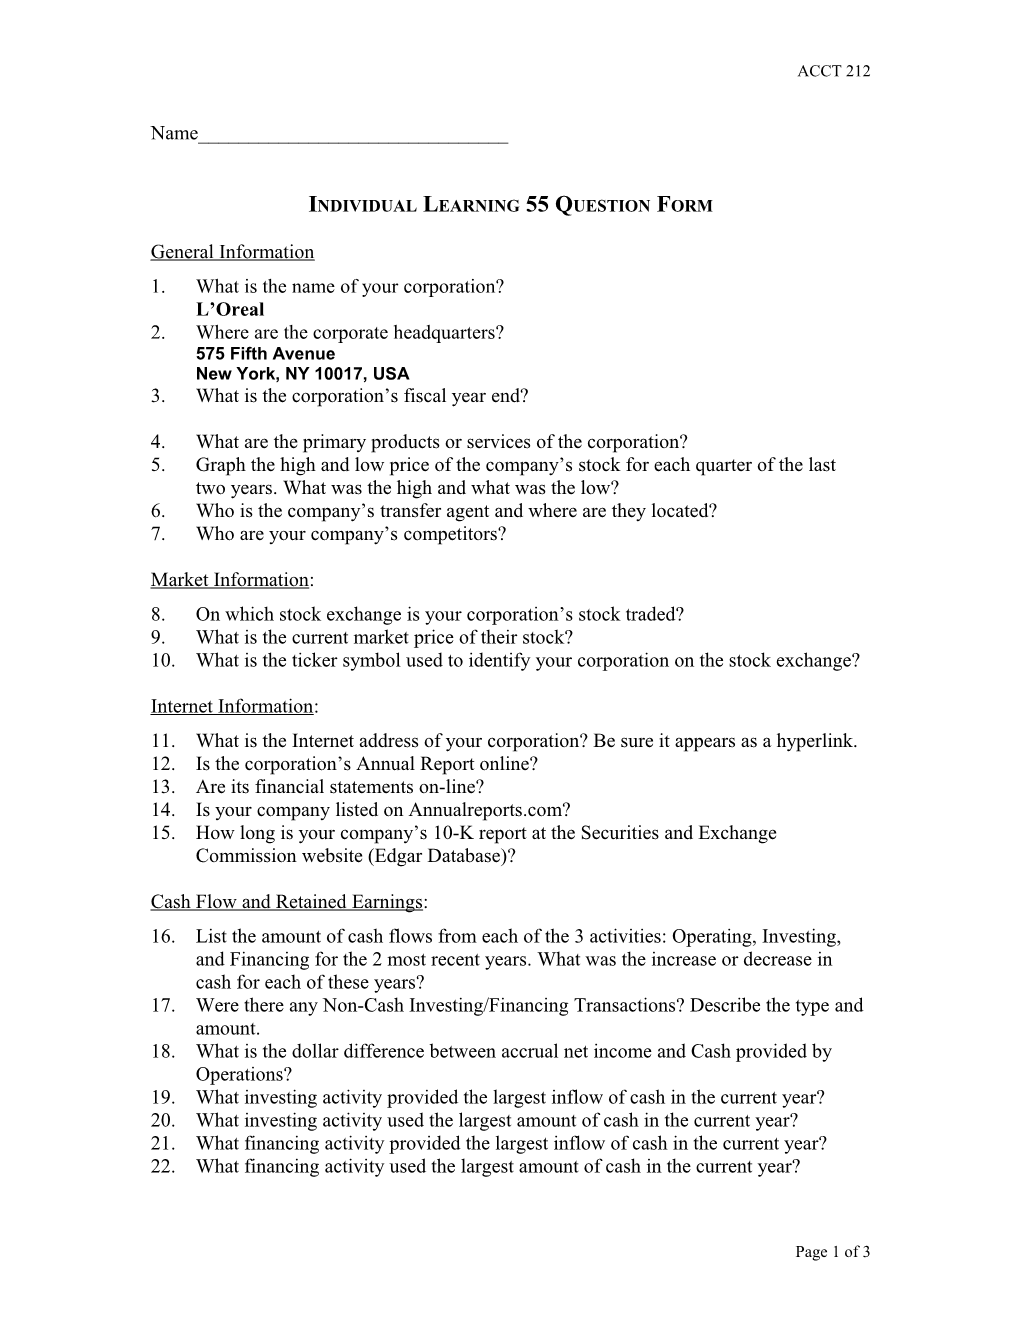 Individual Learning 55 Question Form